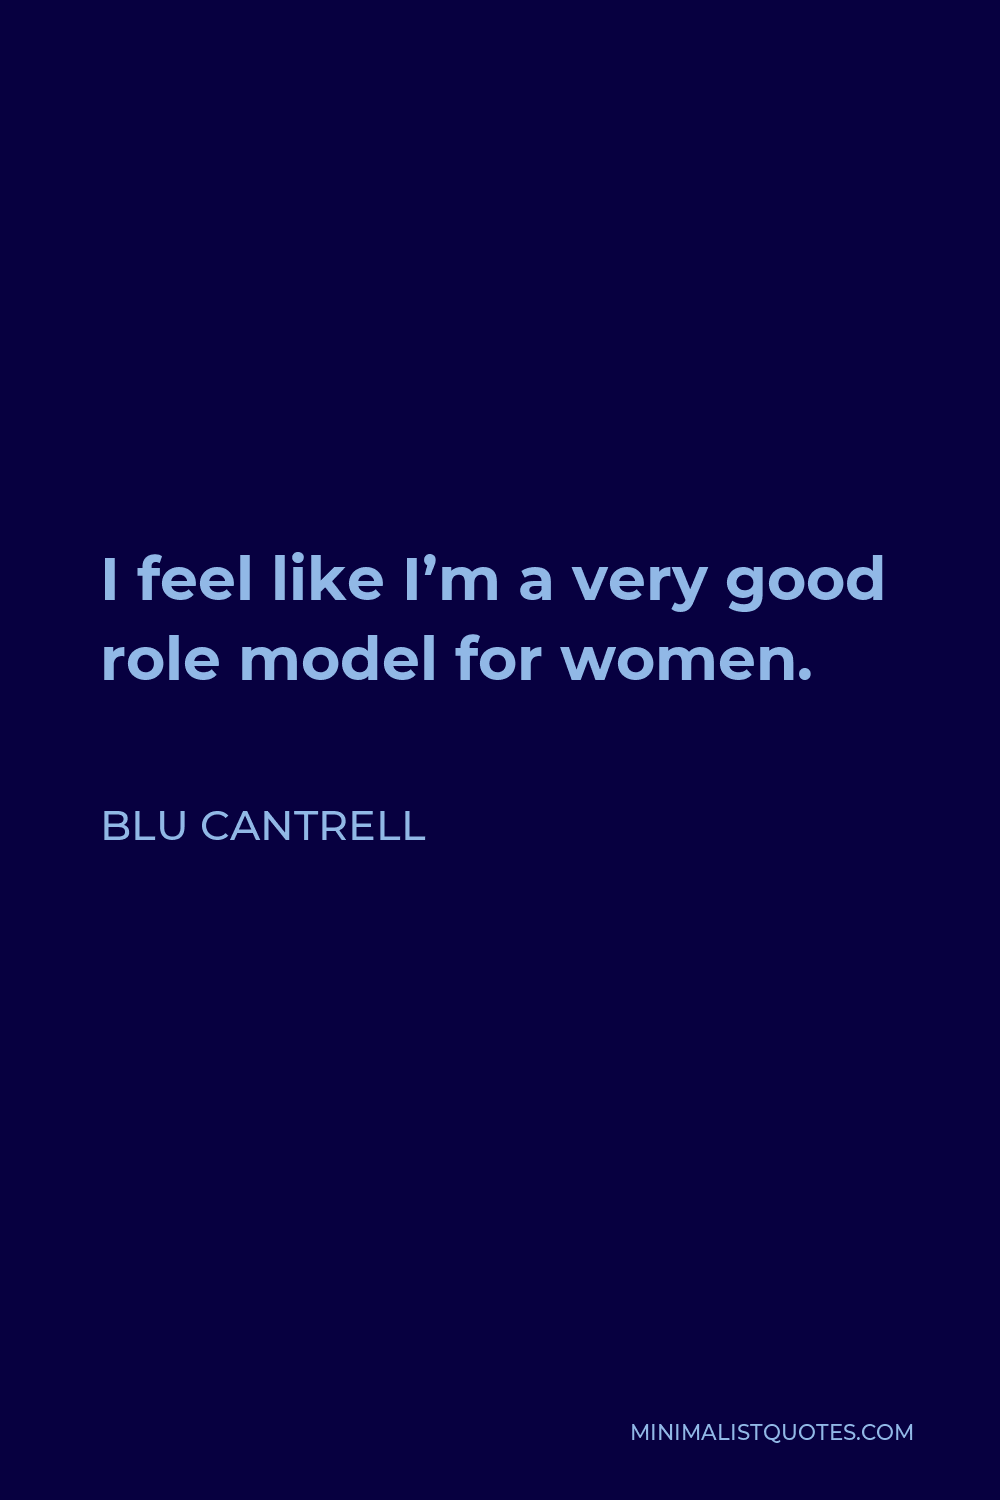 Blu Cantrell Quote - I feel like I’m a very good role model for women.